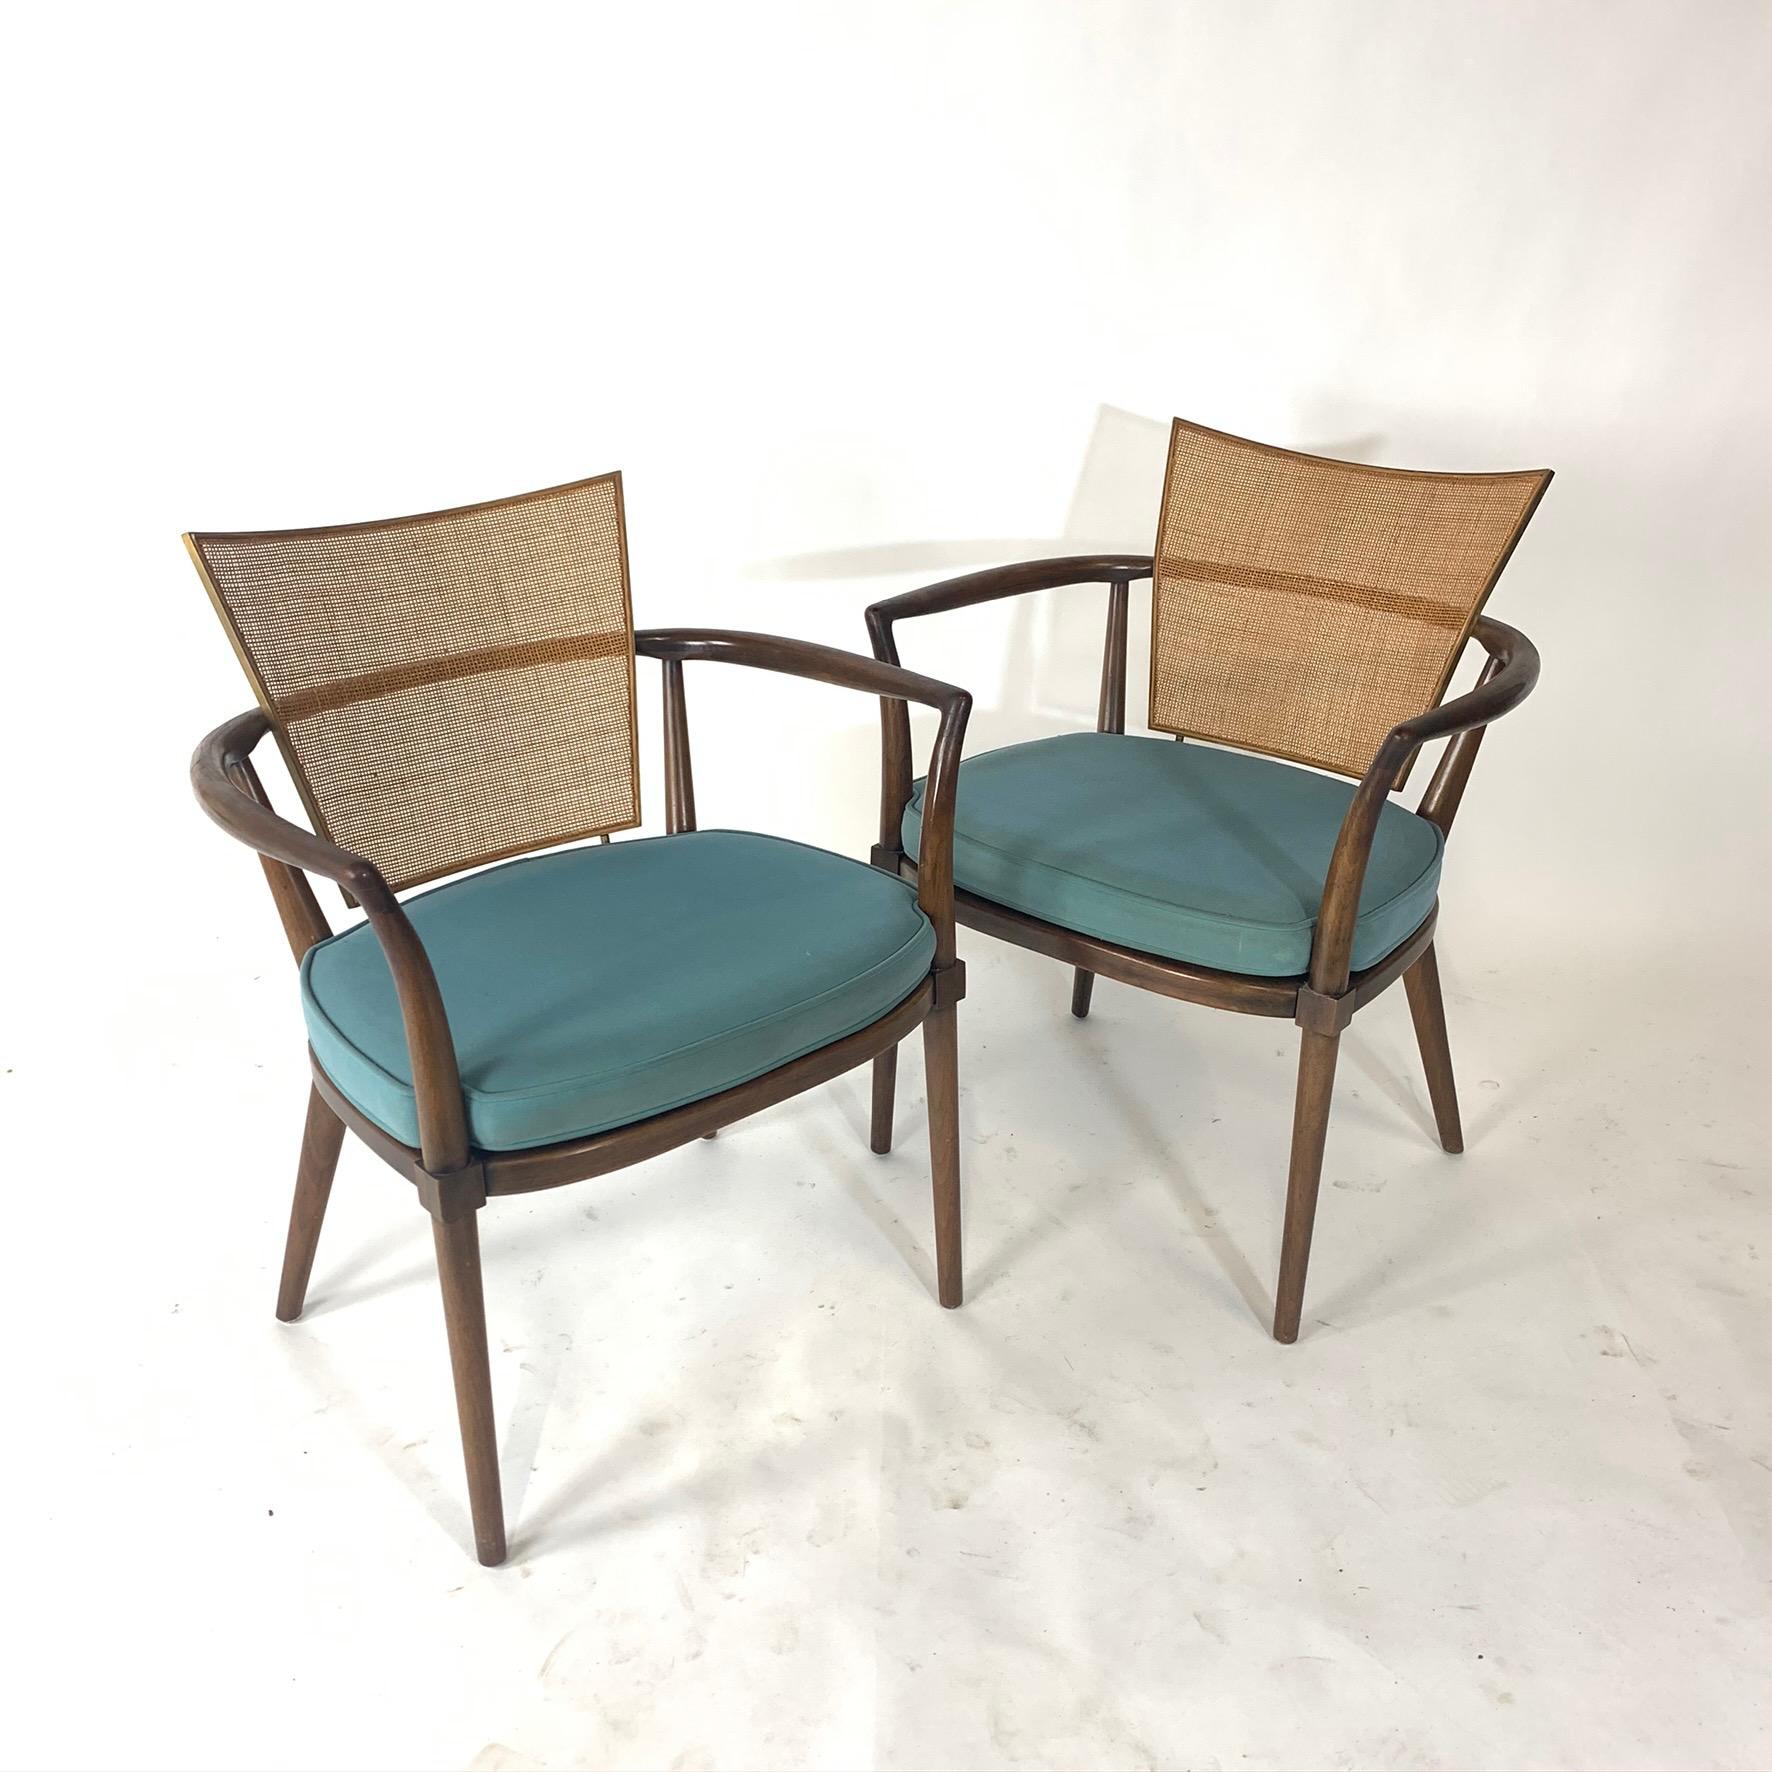 A sculptural pair of Bert England ''Forward Trend'' for Johnson Furniture armchairs in very good original condition. These chairs work well on there own as occasional or accent chairs or head of the dining table chairs. The chairs feature tightly